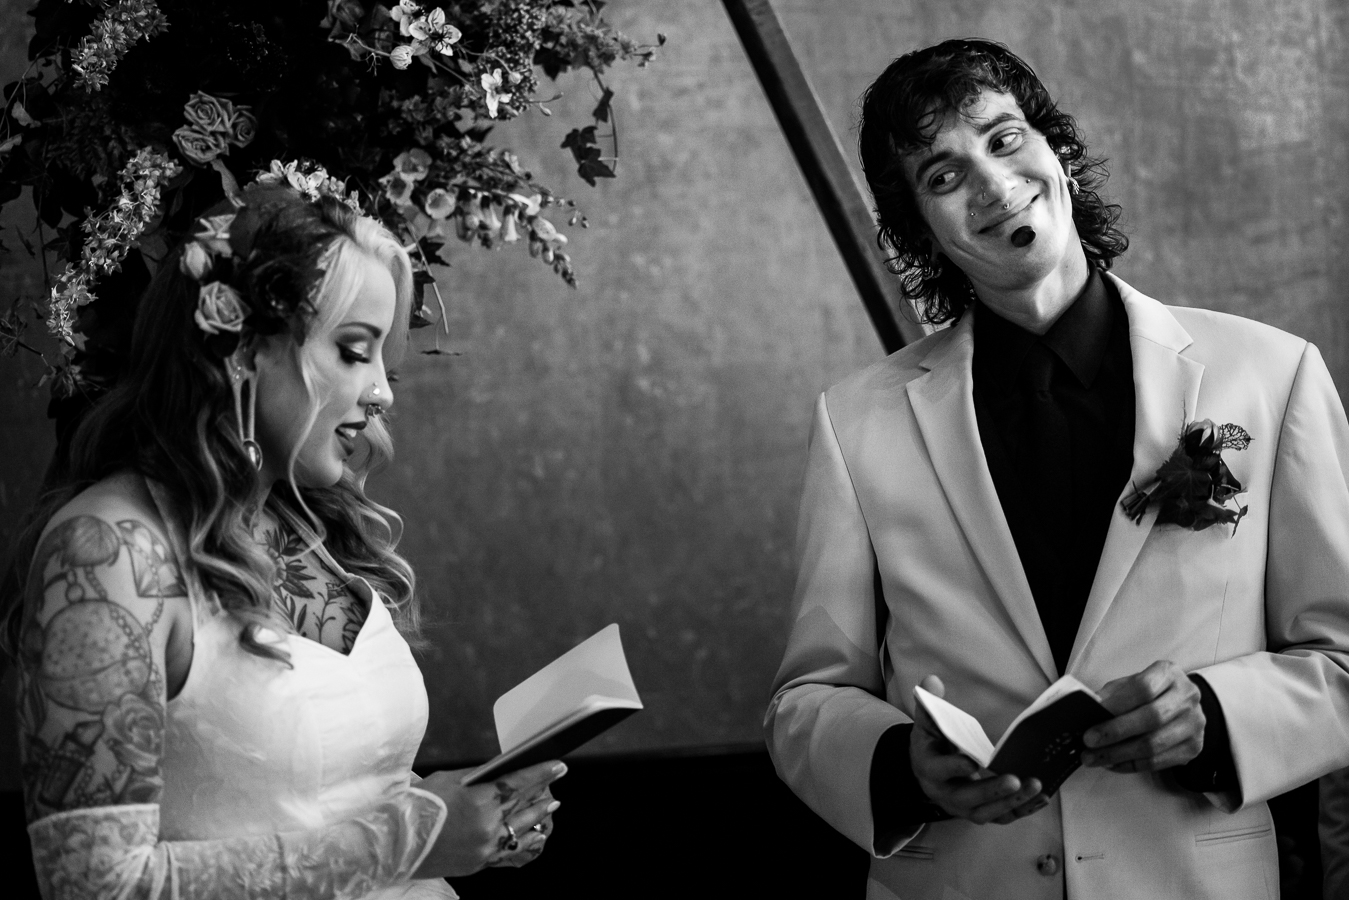 Cork Factory Hotel Wedding Photographer, lisa rhinehart, captures this black and white image of the groom smiling from ear to ear as he looks at his bride reading her vows to him during their wedding ceremony 